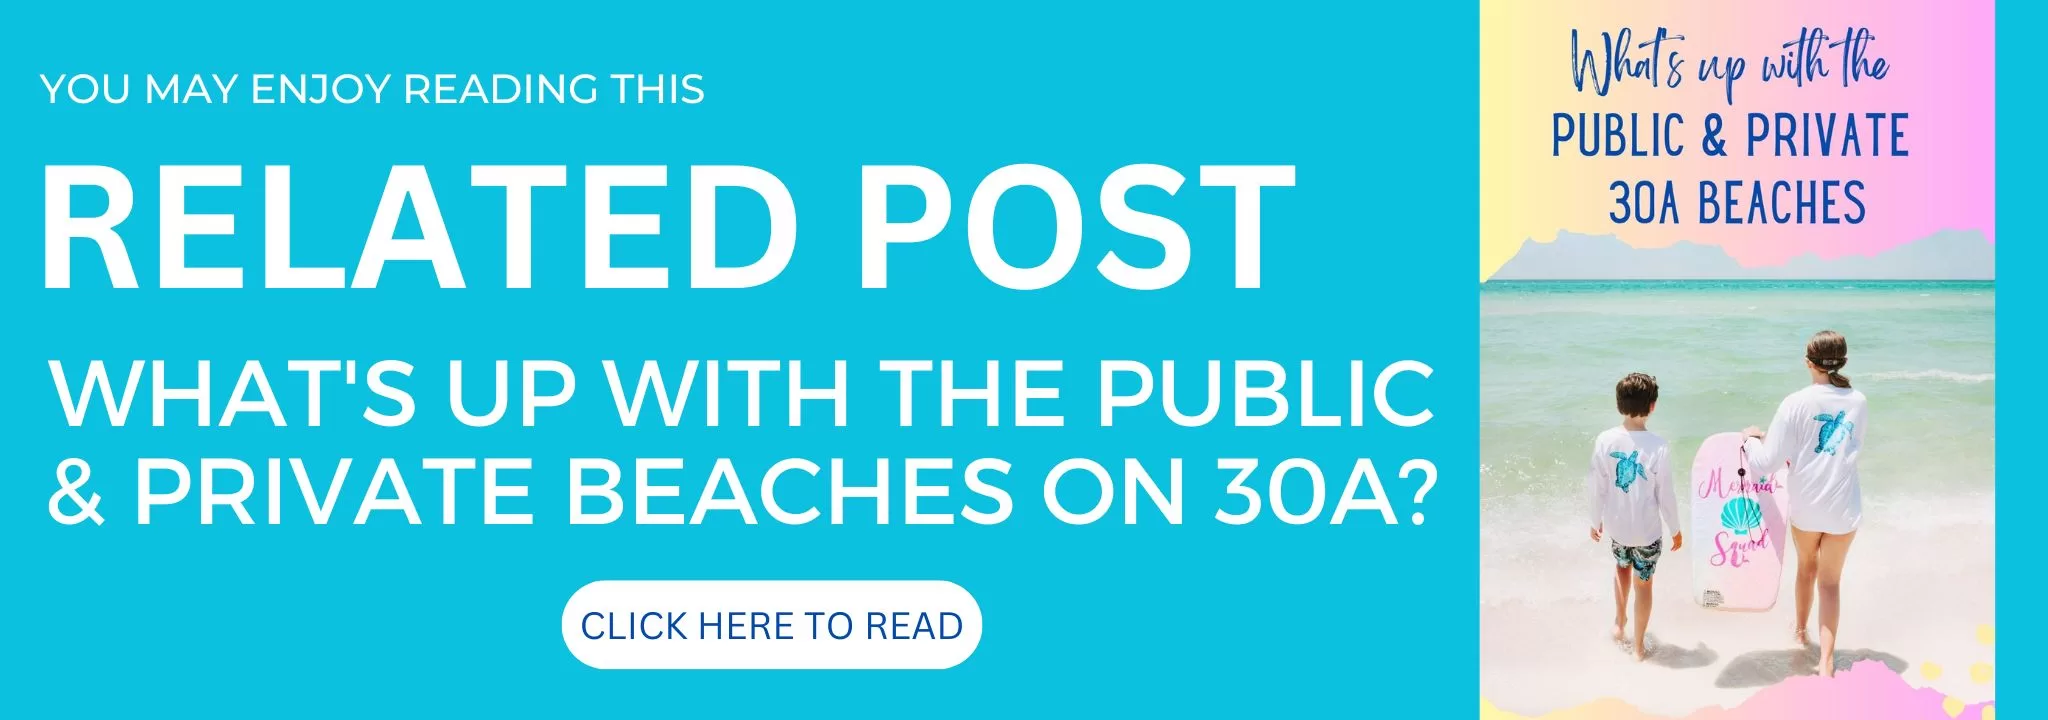 Banner for a 30A related post about the public and private beaches on 30A